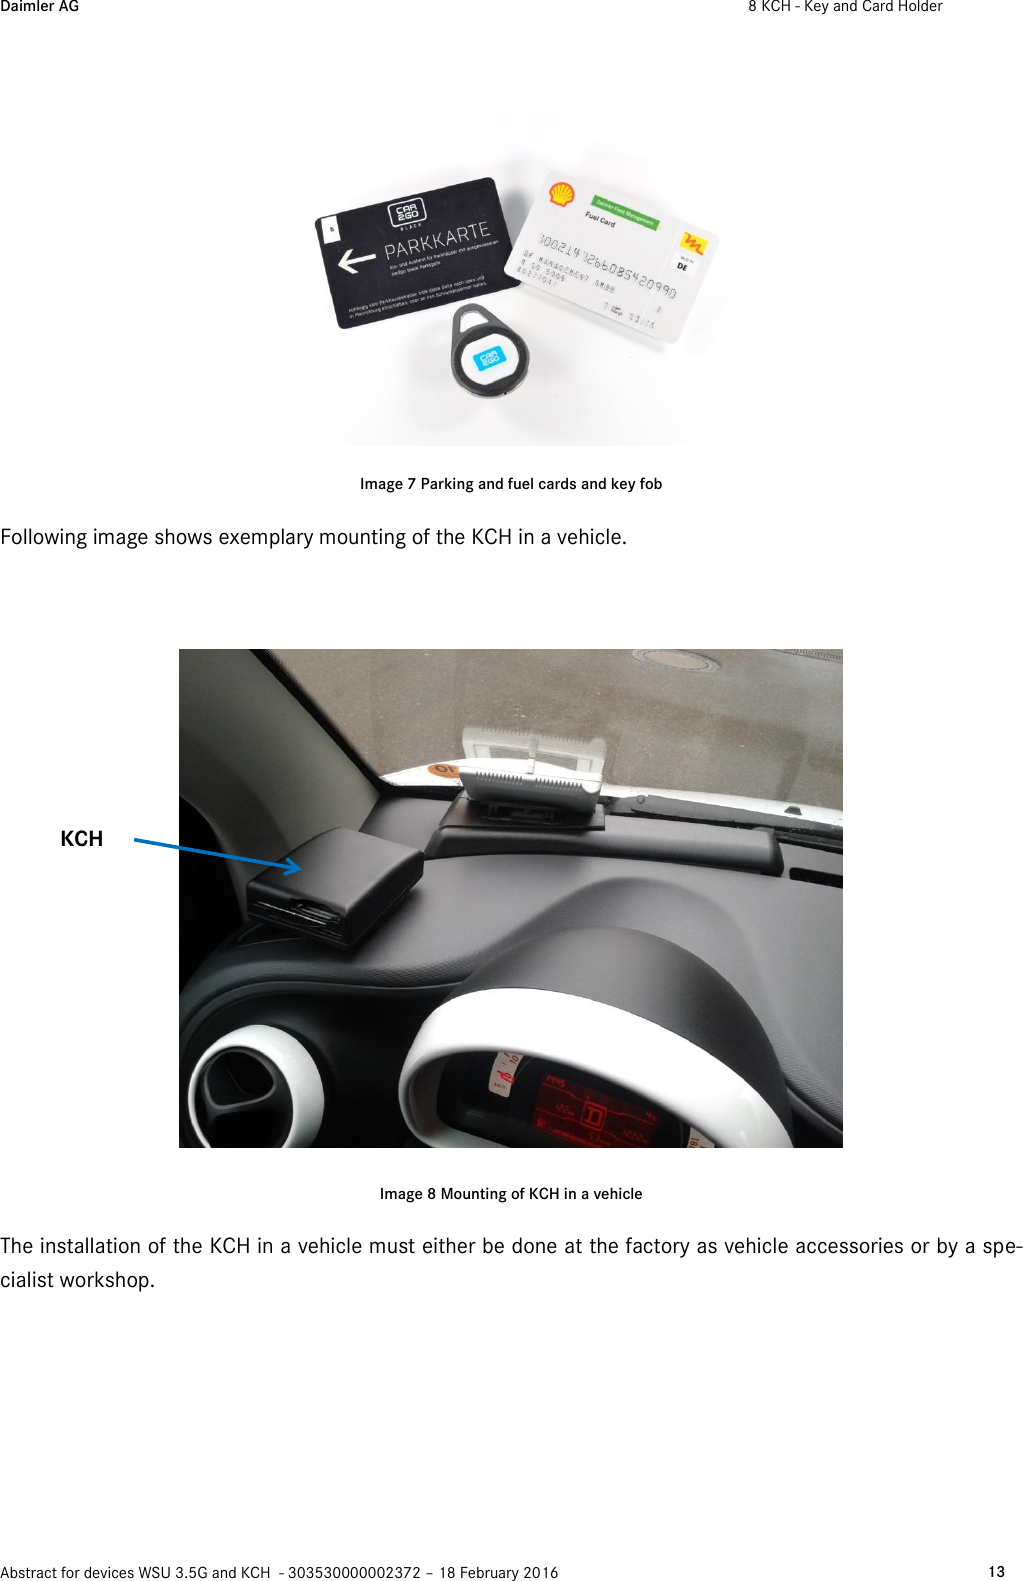 Daimler AG  8 KCH - Key and Card Holder    Abstract for devices WSU 3.5G and KCH  - 303530000002372 – 18 February 2016   13   Image 7 Parking and fuel cards and key fob Following image shows exemplary mounting of the KCH in a vehicle.    Image 8 Mounting of KCH in a vehicle The installation of the KCH in a vehicle must either be done at the factory as vehicle accessories or by a spe-cialist workshop.   KCH 